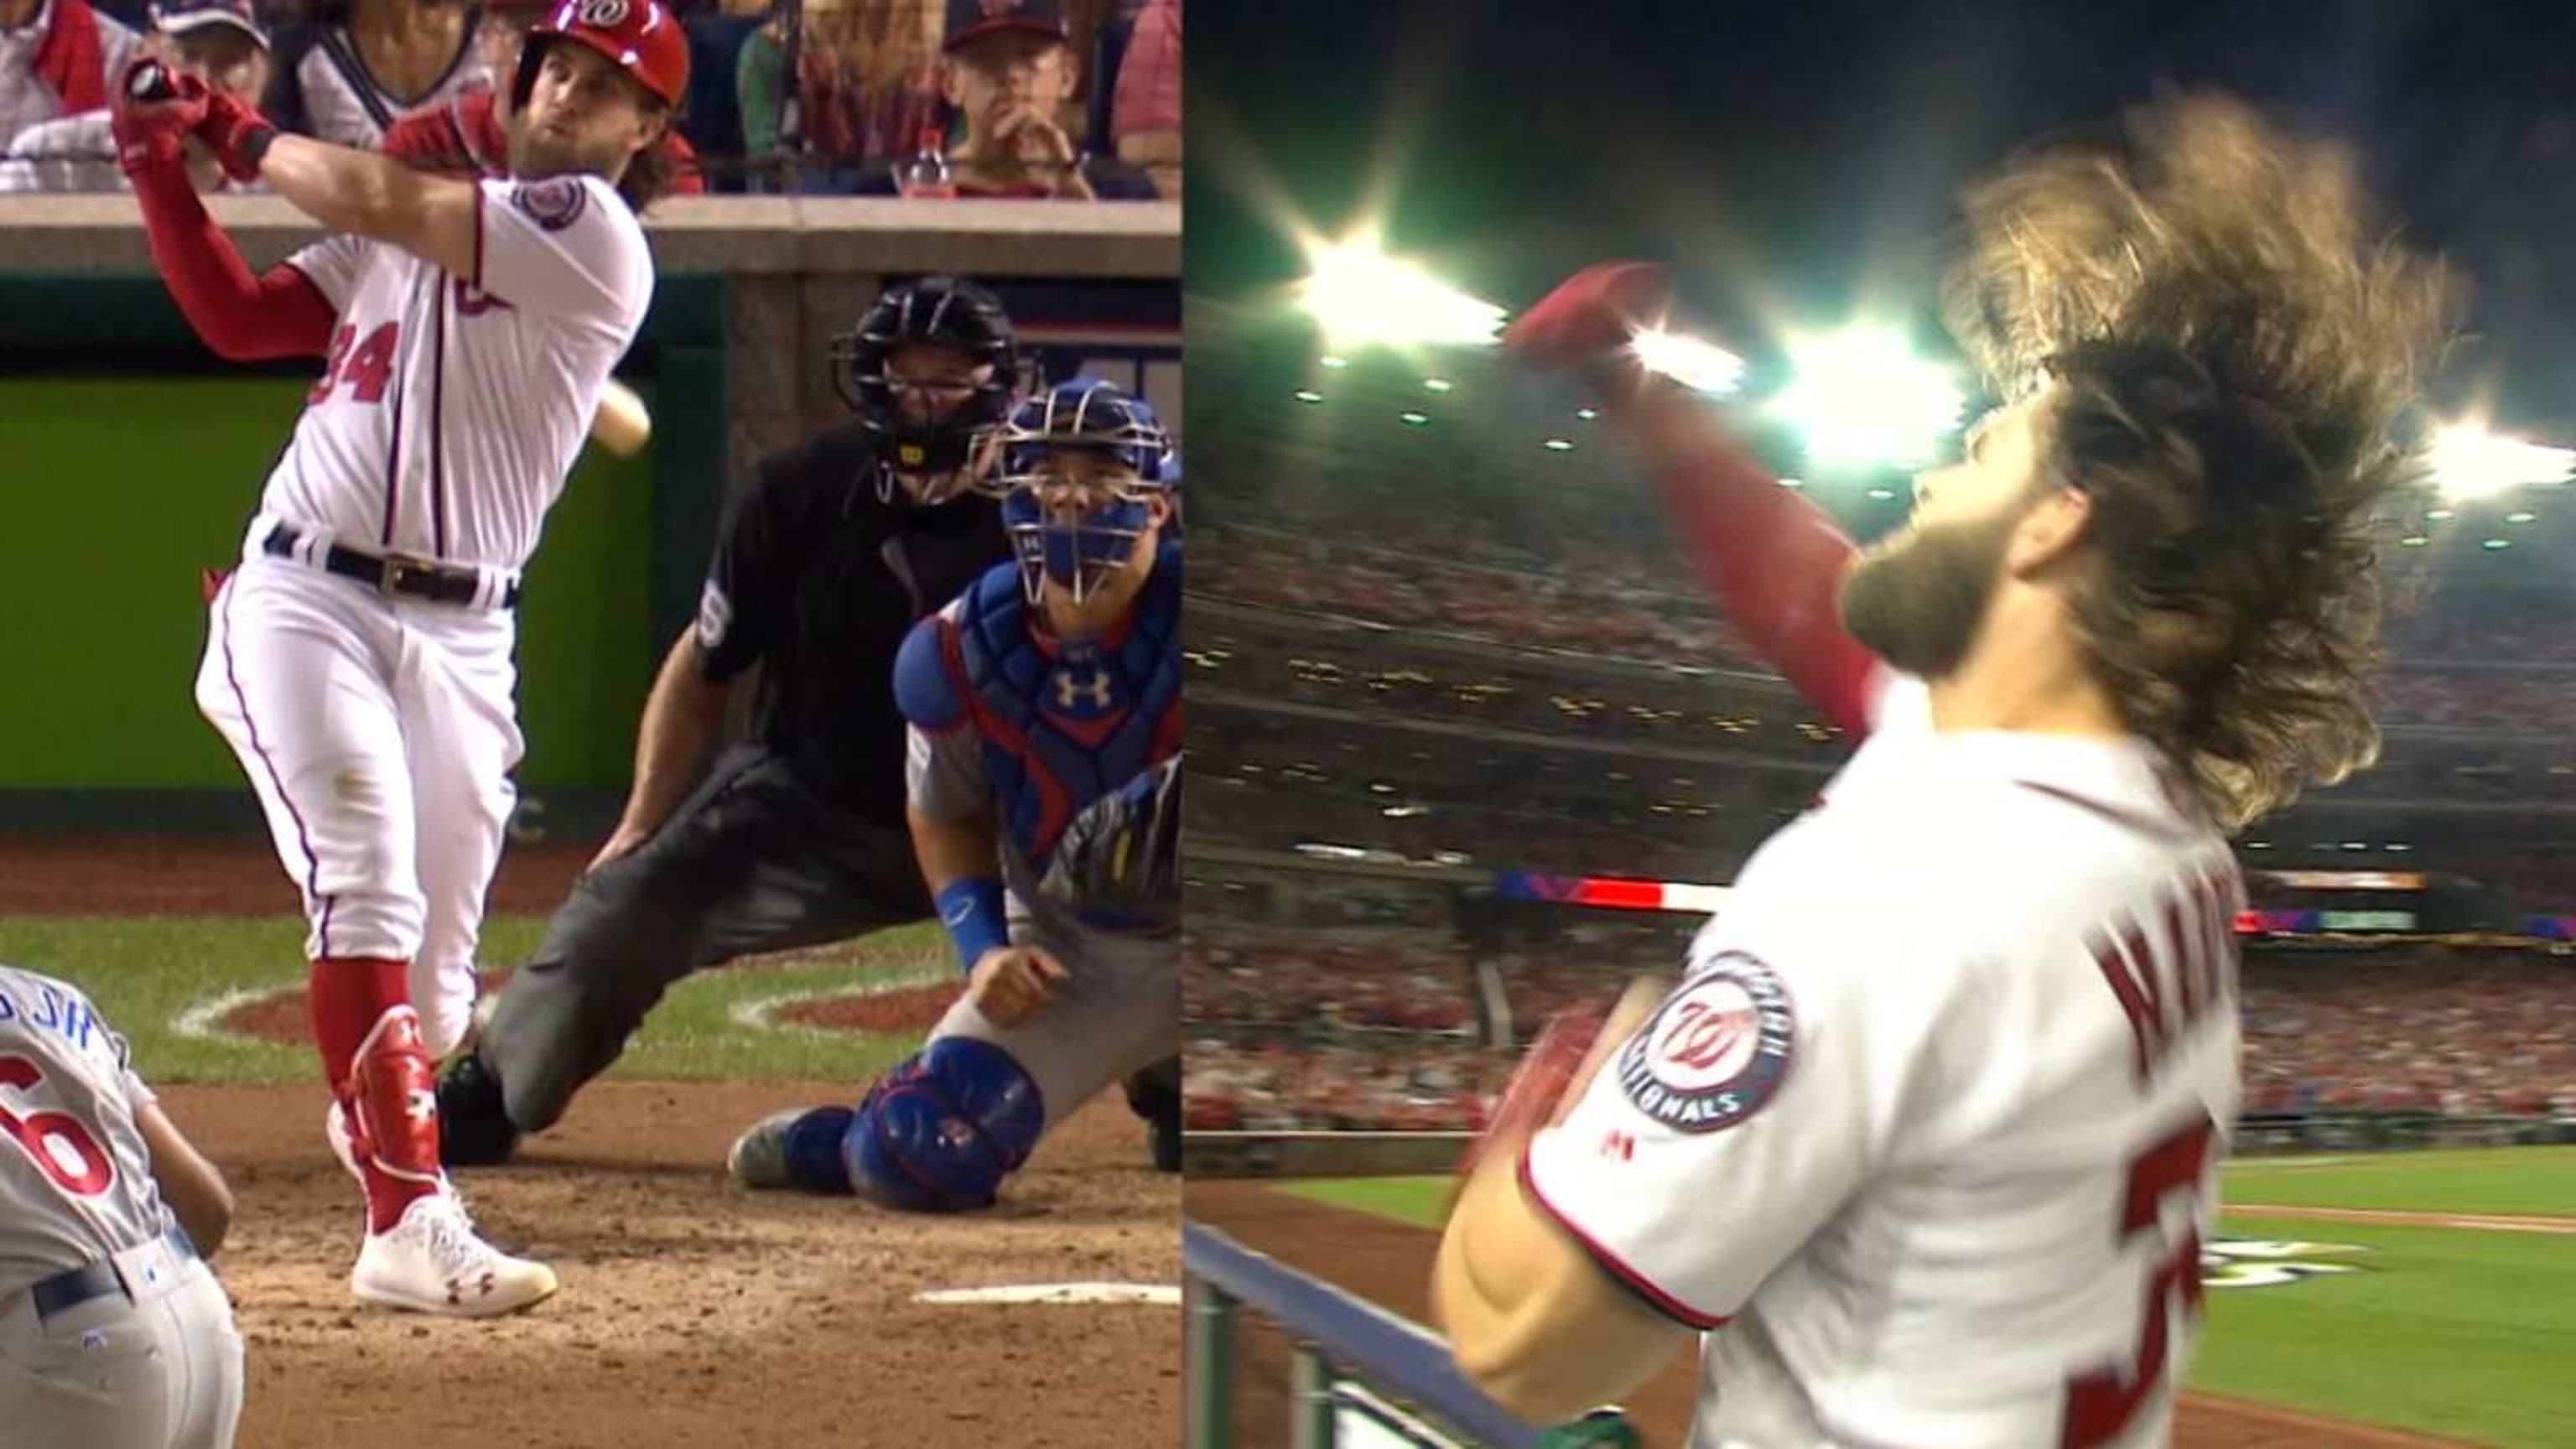 Bryce Harper's game-tying home run during Game 2 of the NLDS